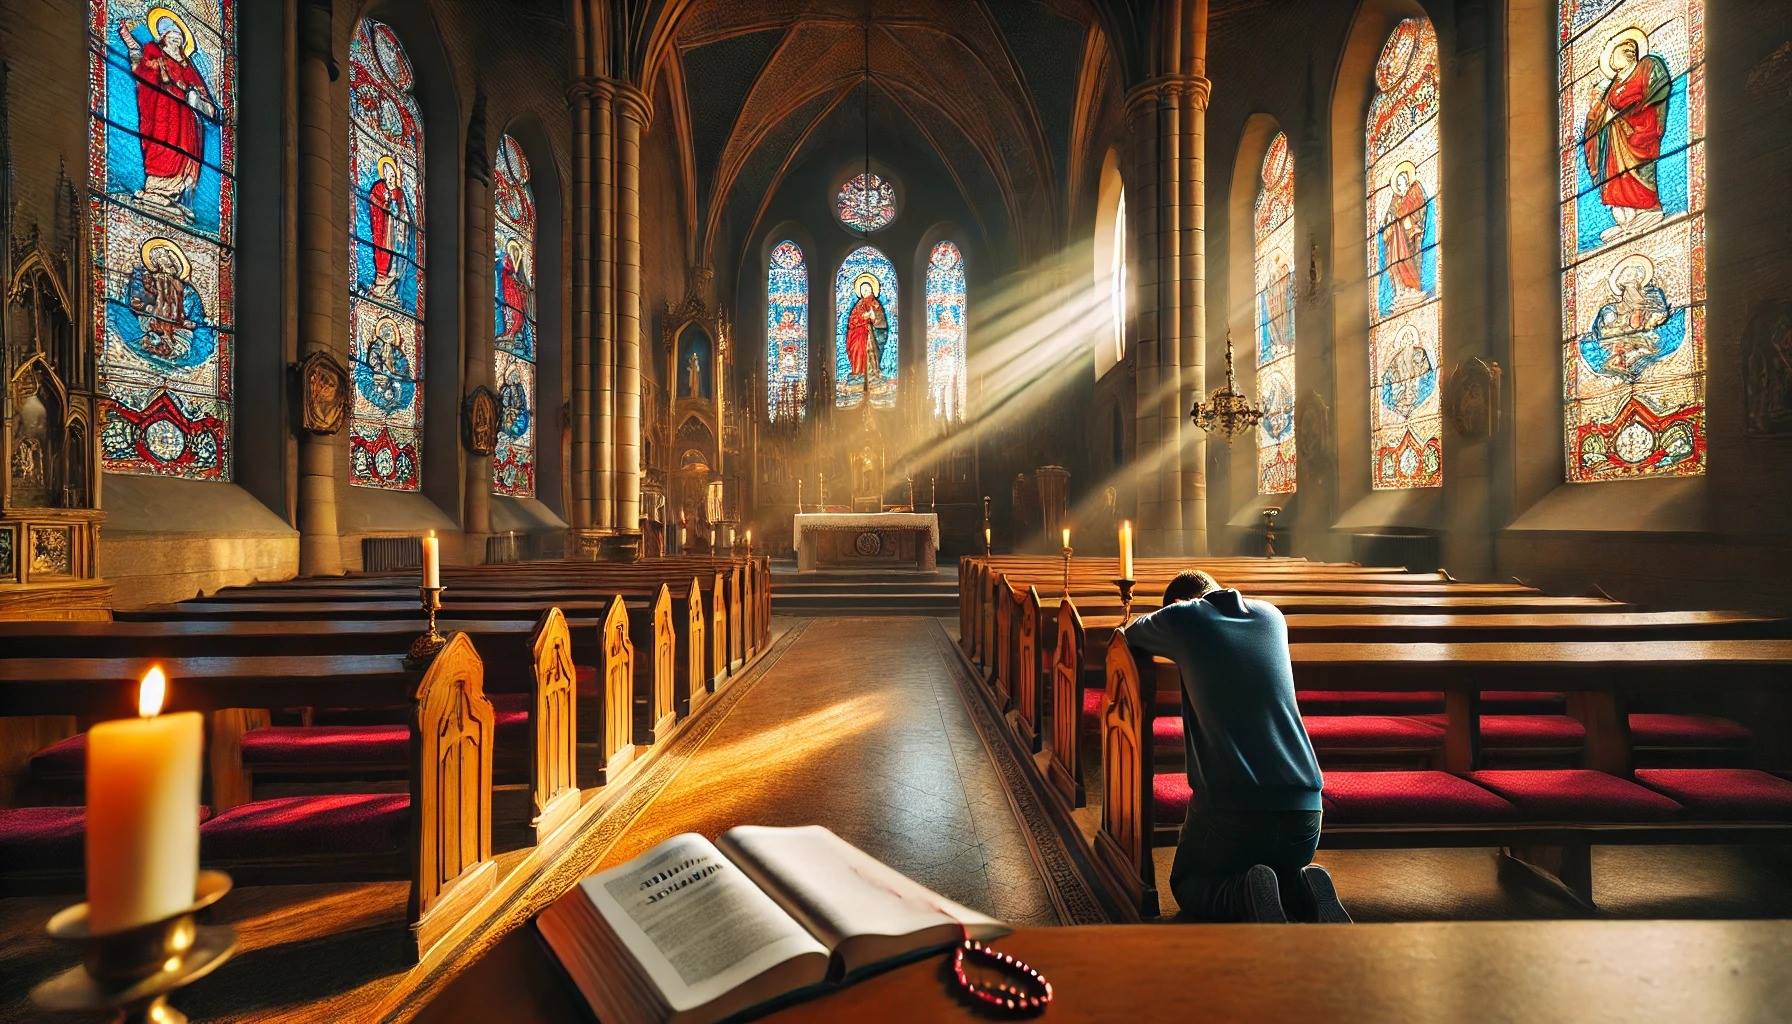 15 Prayer Requests For Every Christian